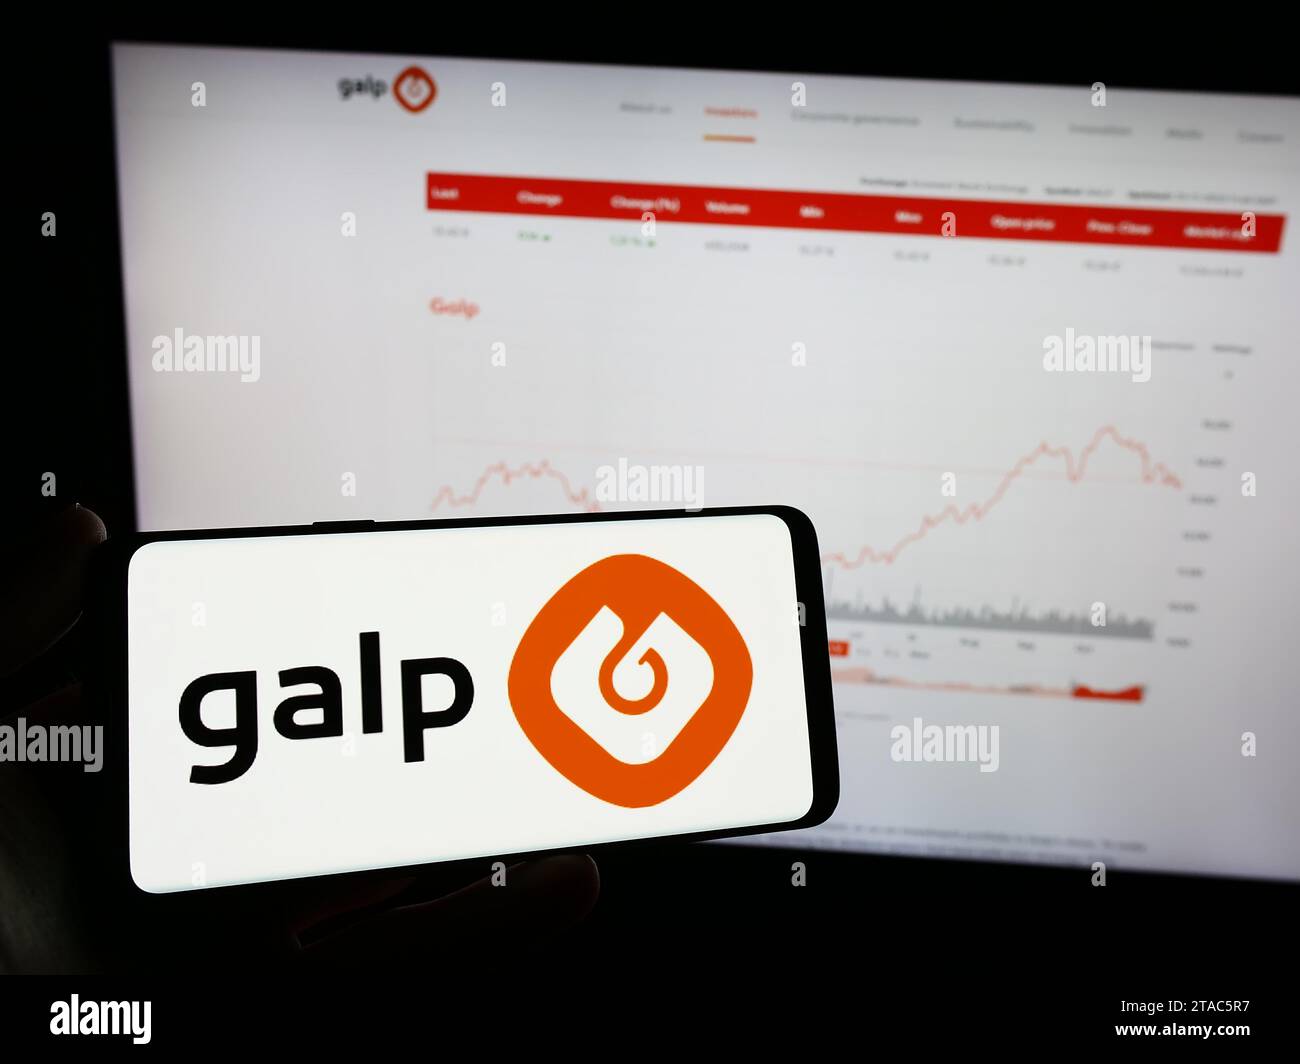 Person holding mobile phone with logo of Portuguese energy company Galp Energia SGPS S.A. in front of business web page. Focus on phone display. Stock Photo